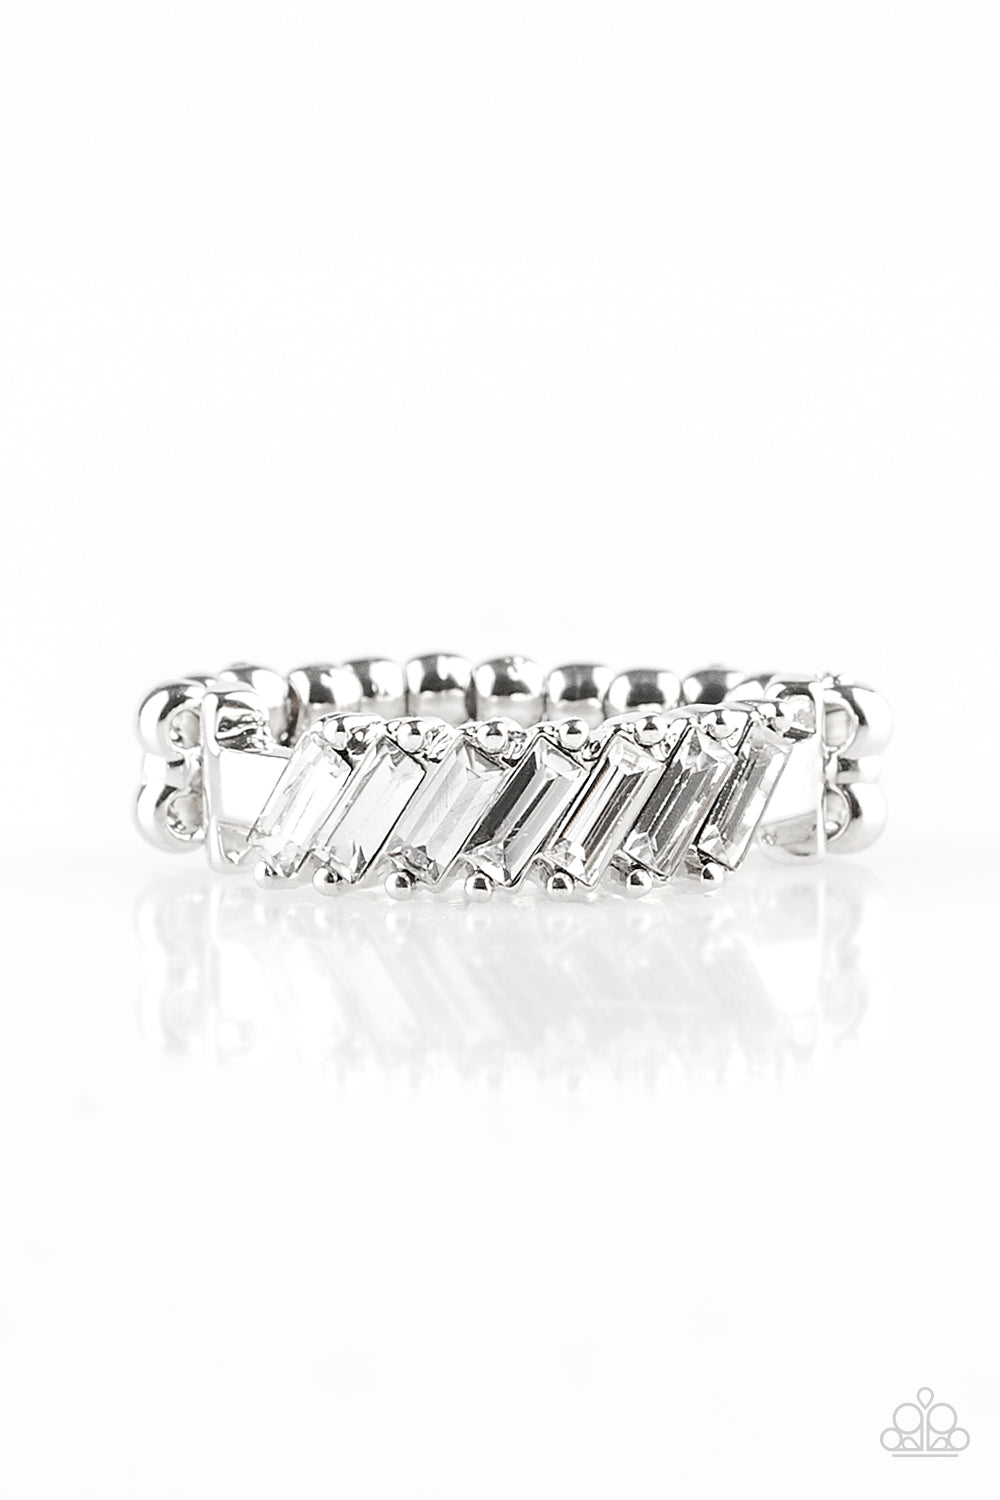 MONEY HUNGRY - WHITE BAGUETTES RING